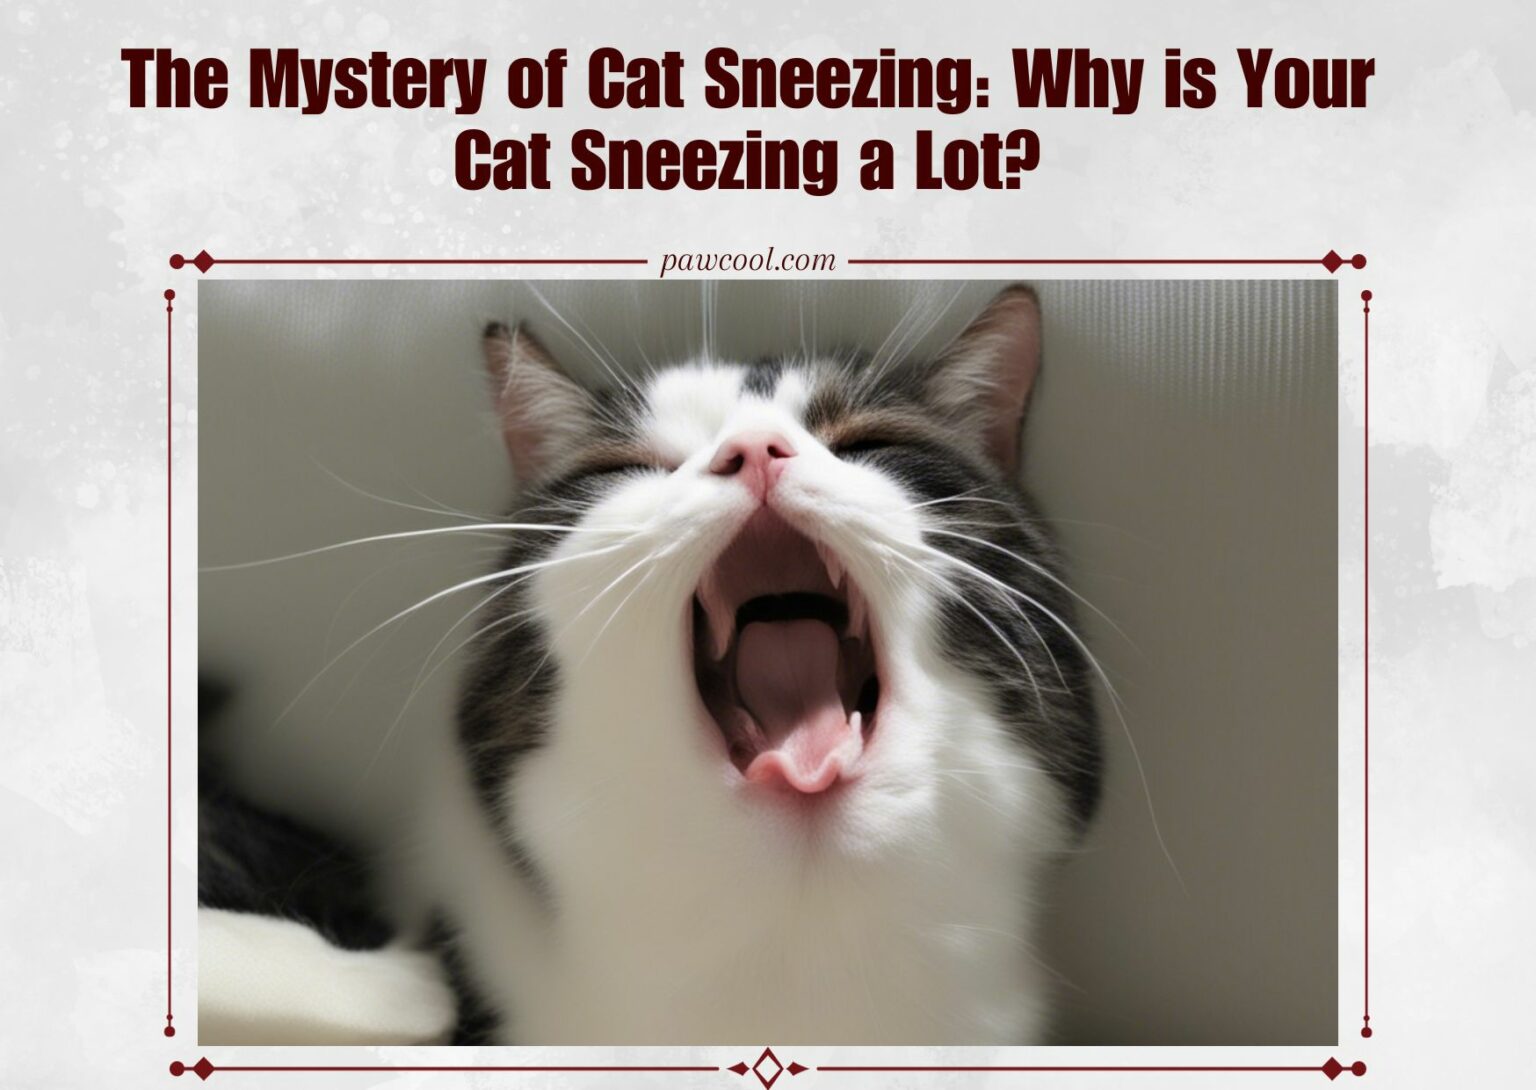 The Mystery of Cat Sneezing: Why is Your Cat Sneezing a Lot?